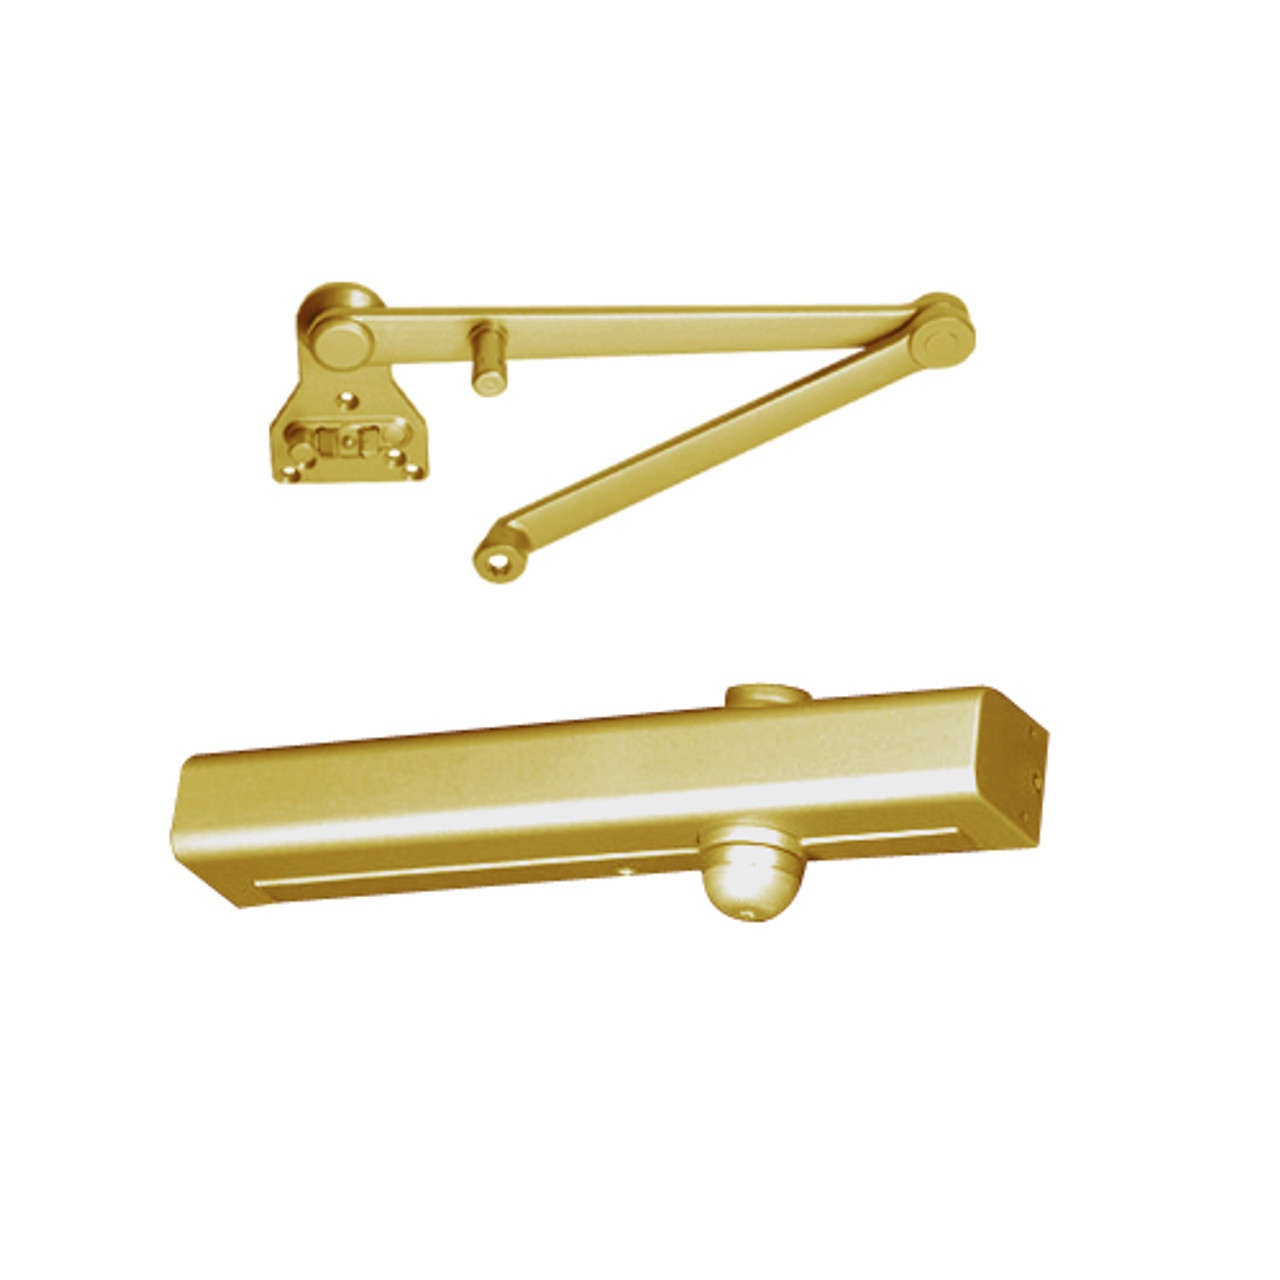 CLP8301RDA-696 Norton 8000 Series Hold Open Door Closers with CloserPlus Ramp Arm in Gold Finish